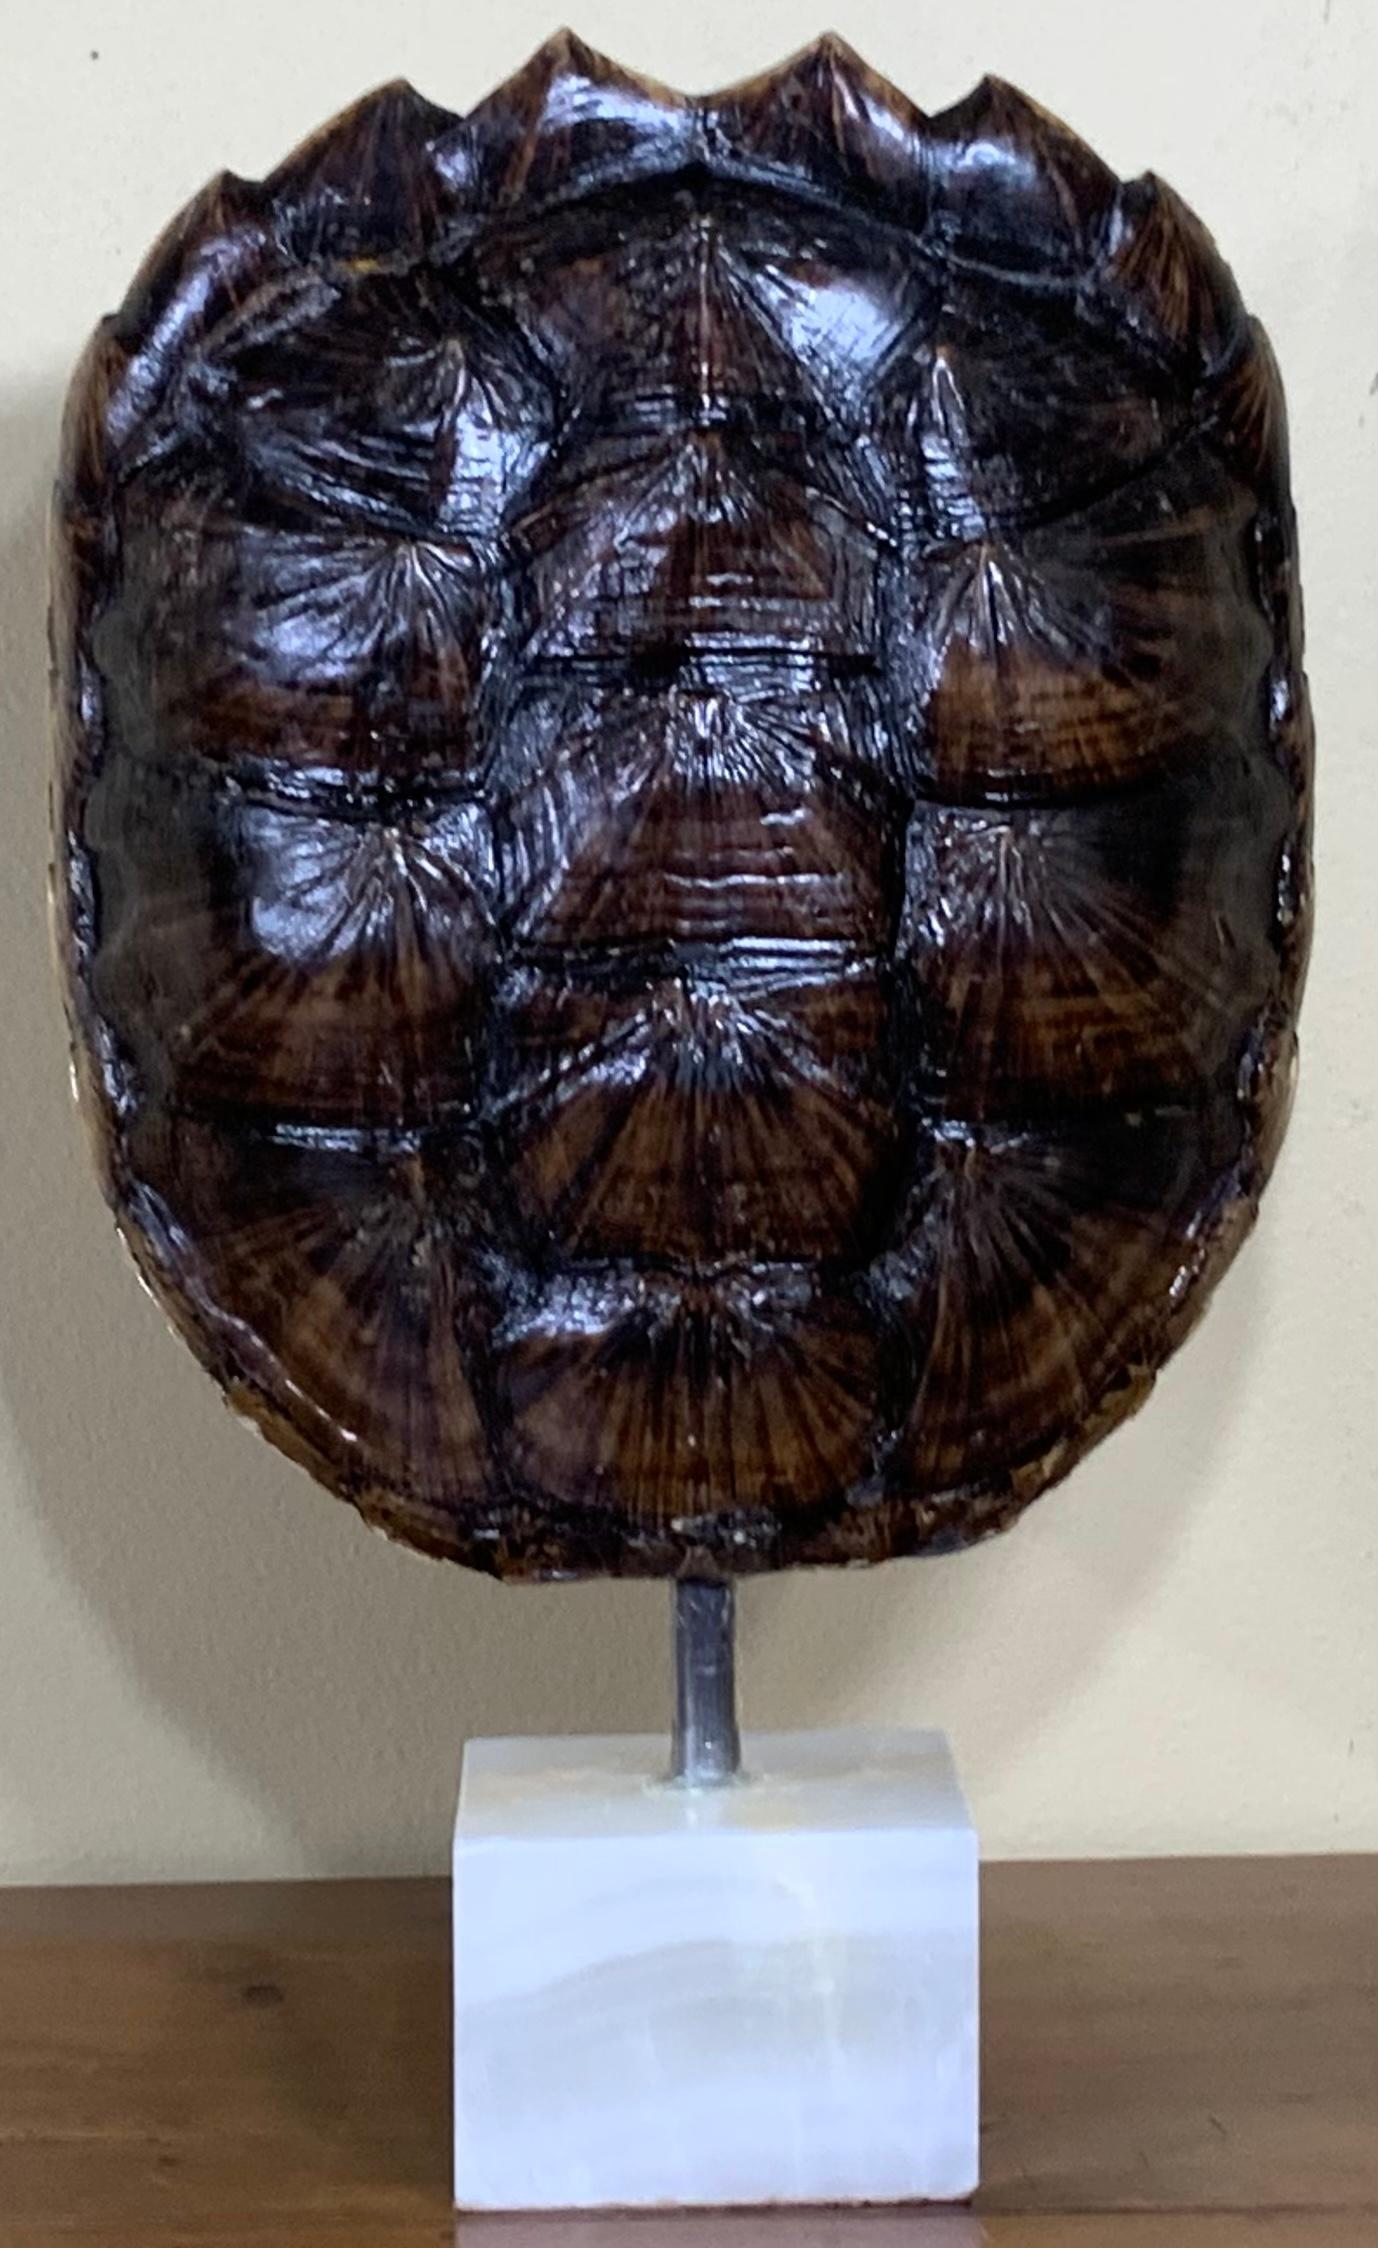 Onyx Genuine American Fresh Water Snapping Turtle Shell For Sale